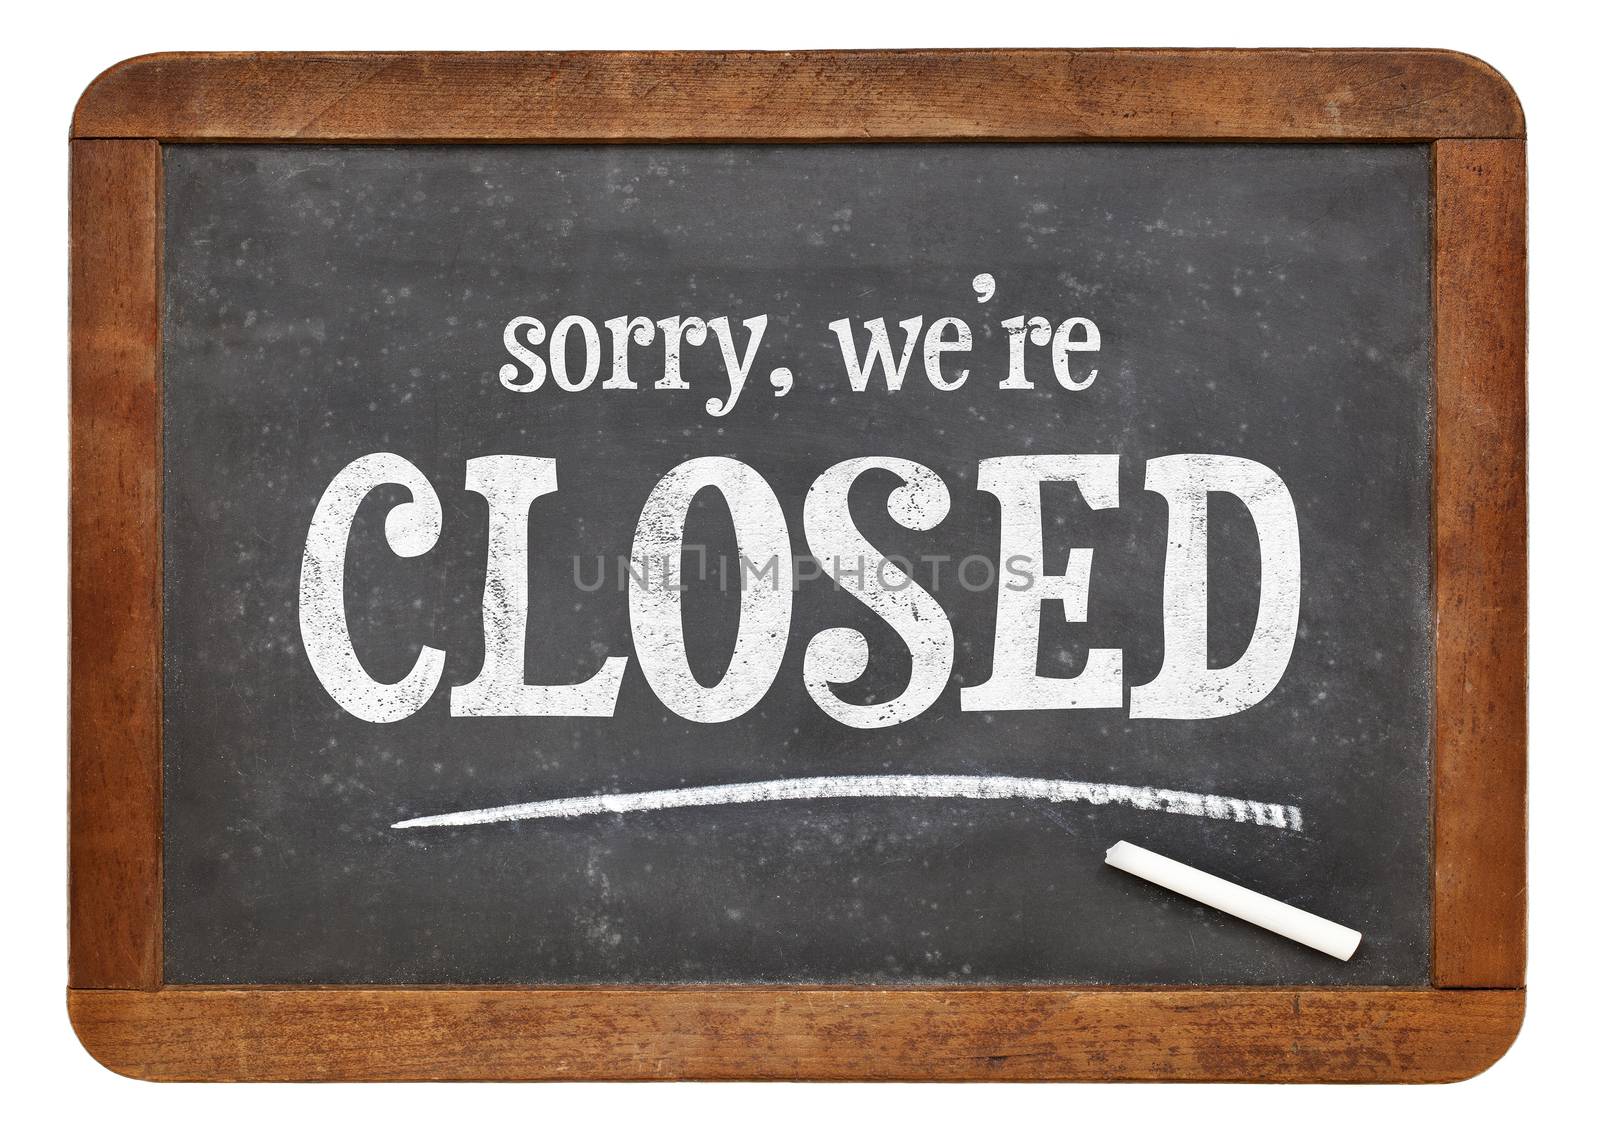 Sorry, we are closed blackboard sign by PixelsAway